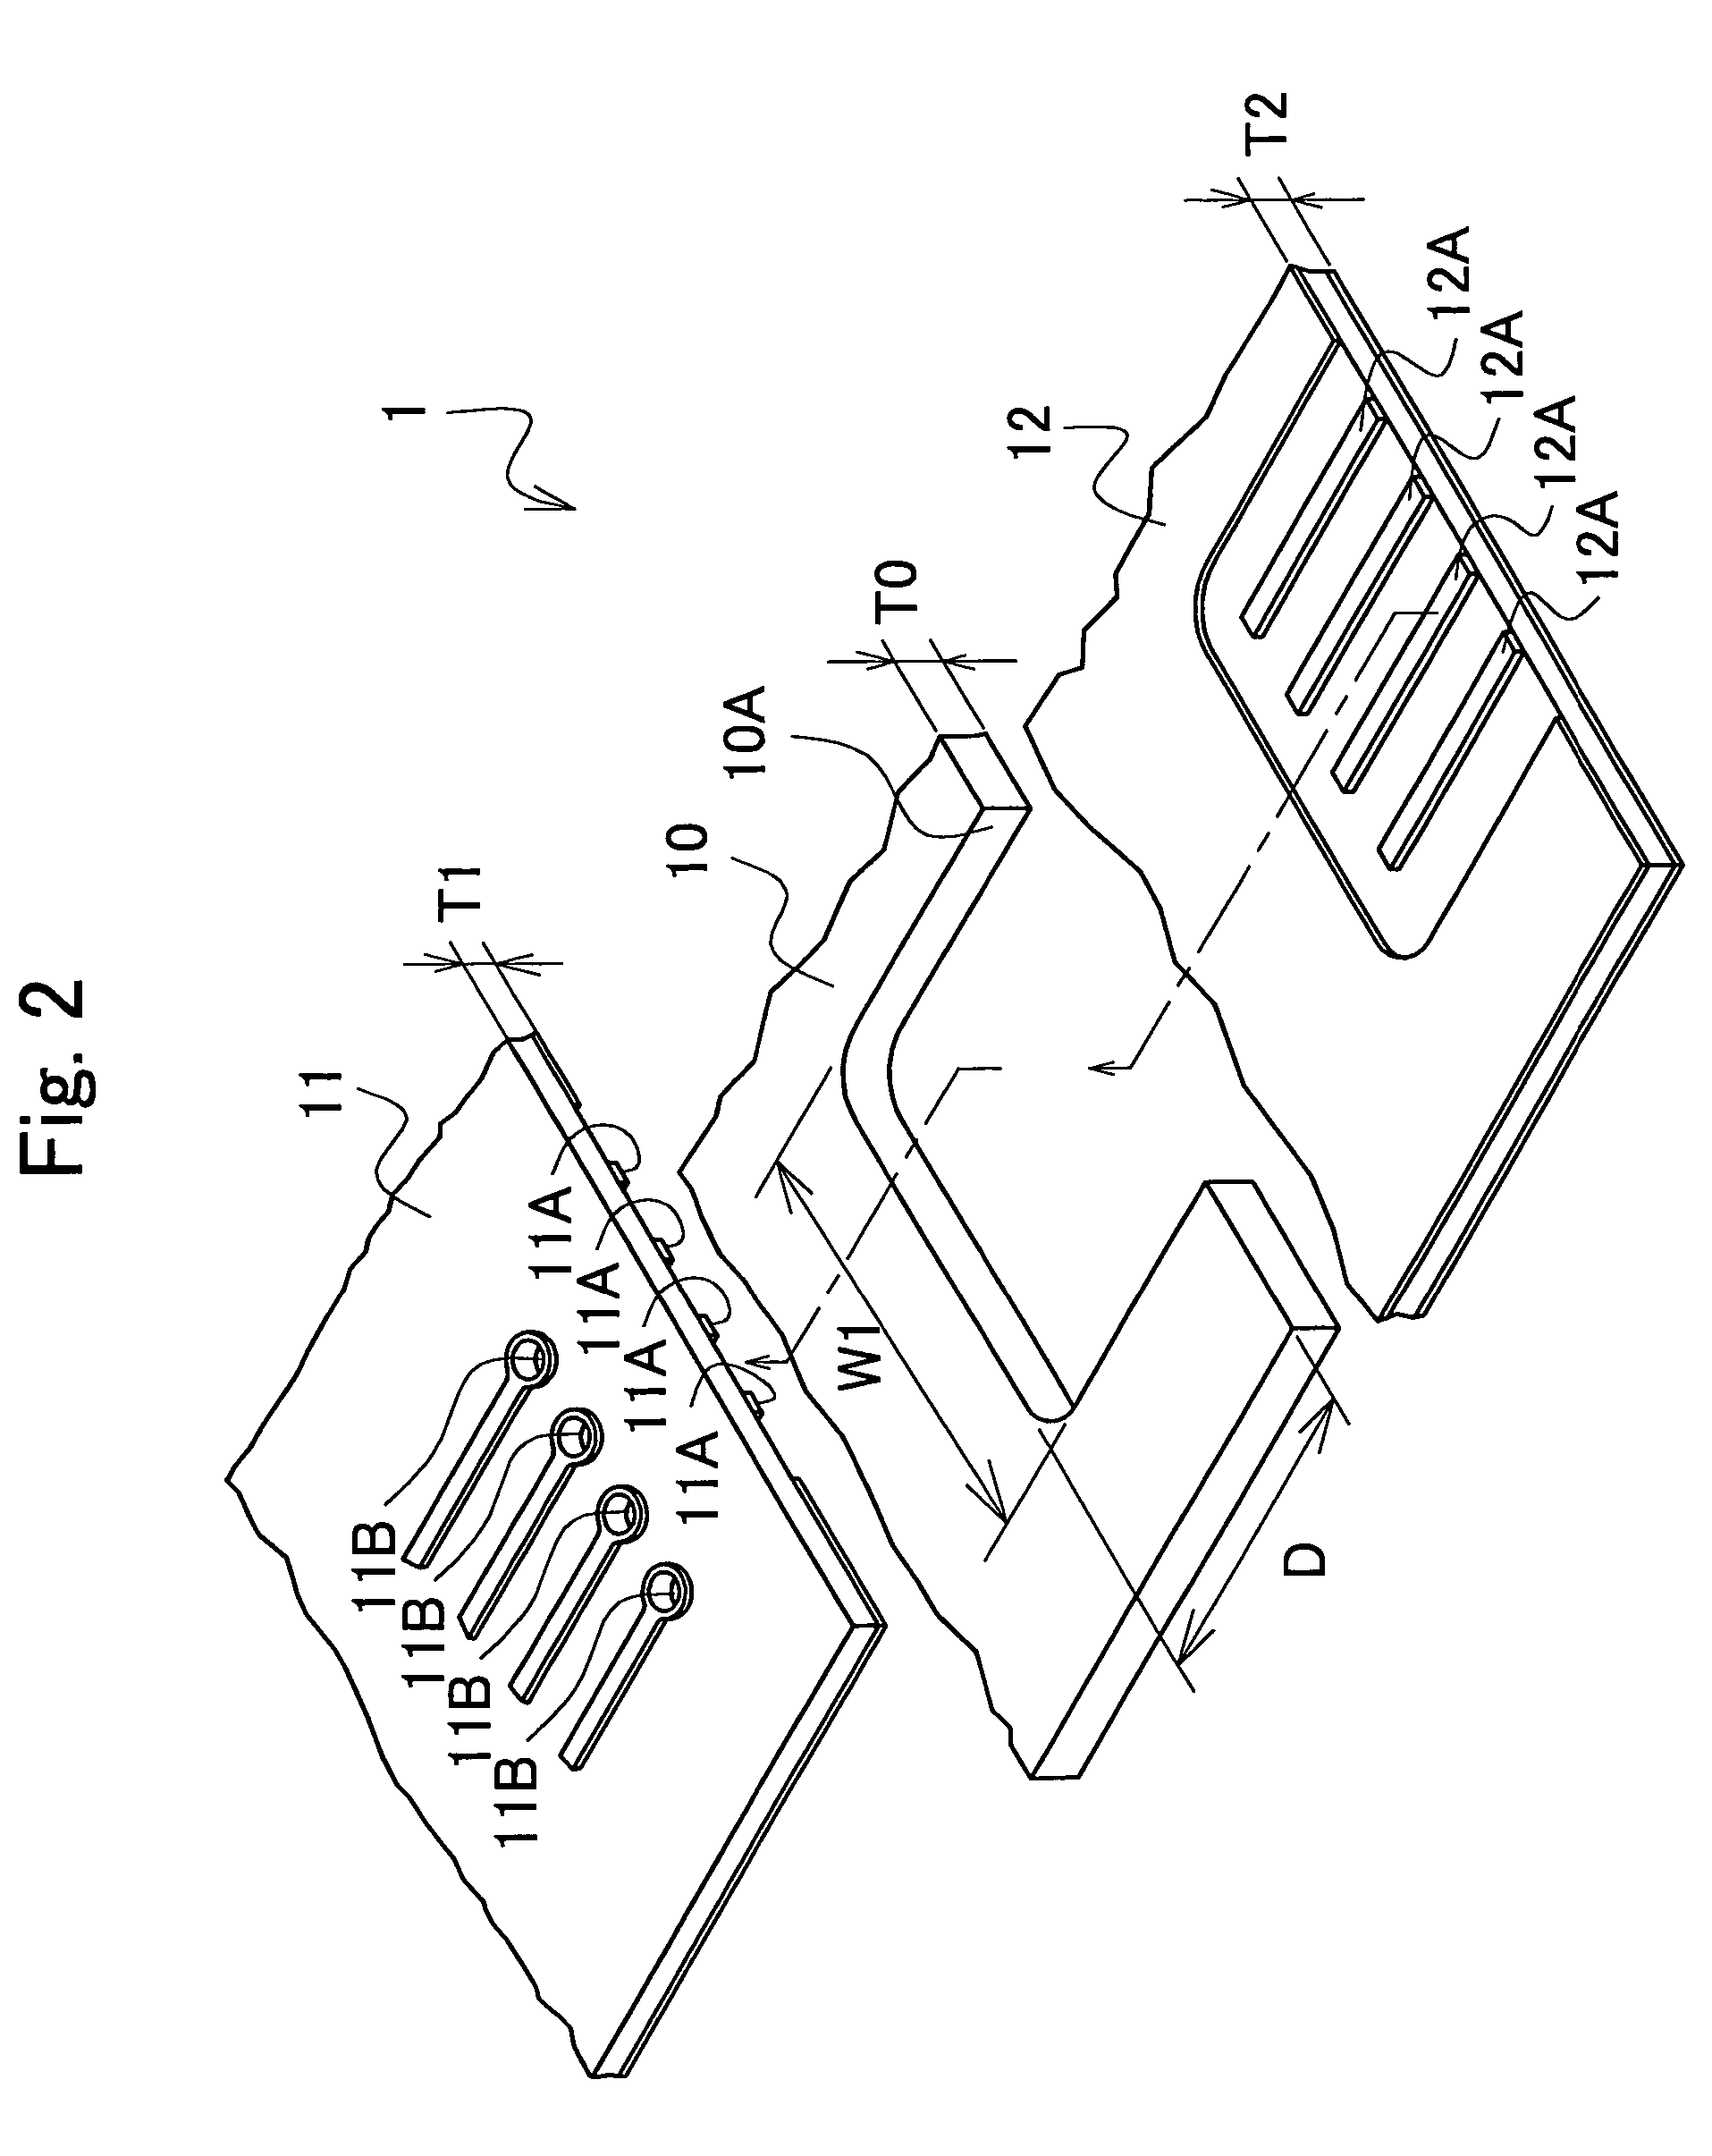 Connection structure of printed wiring board